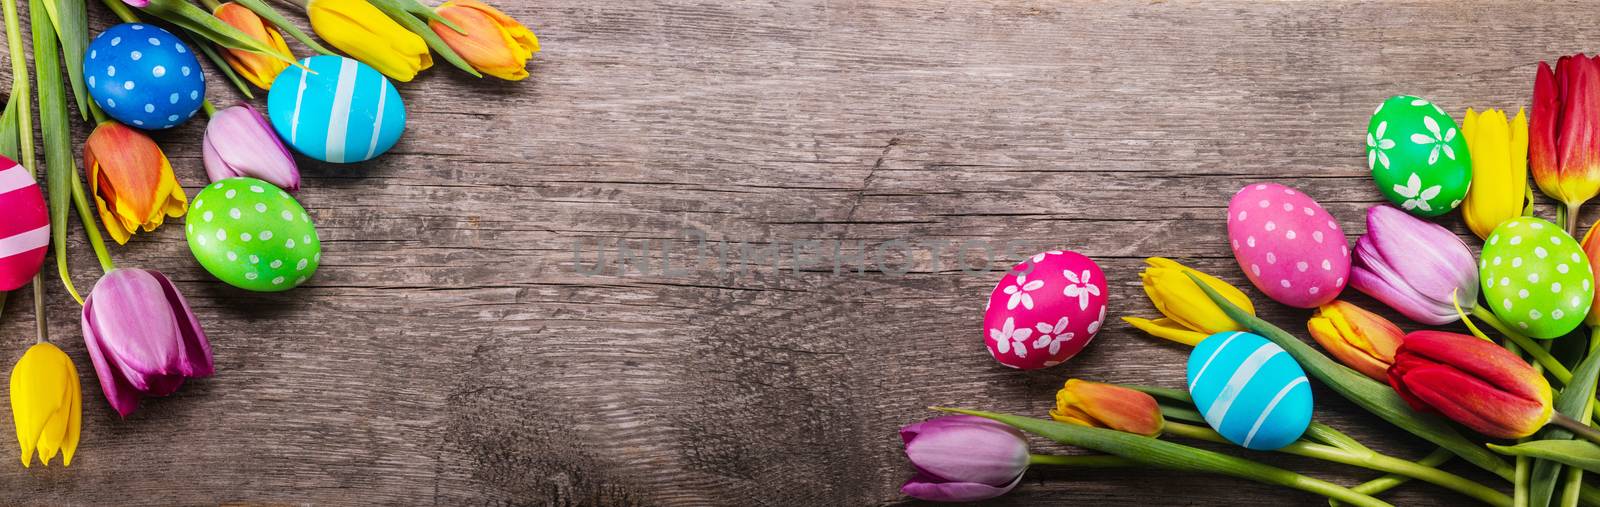 Hand-painted easter eggs with tulips on wooden background copy space for text